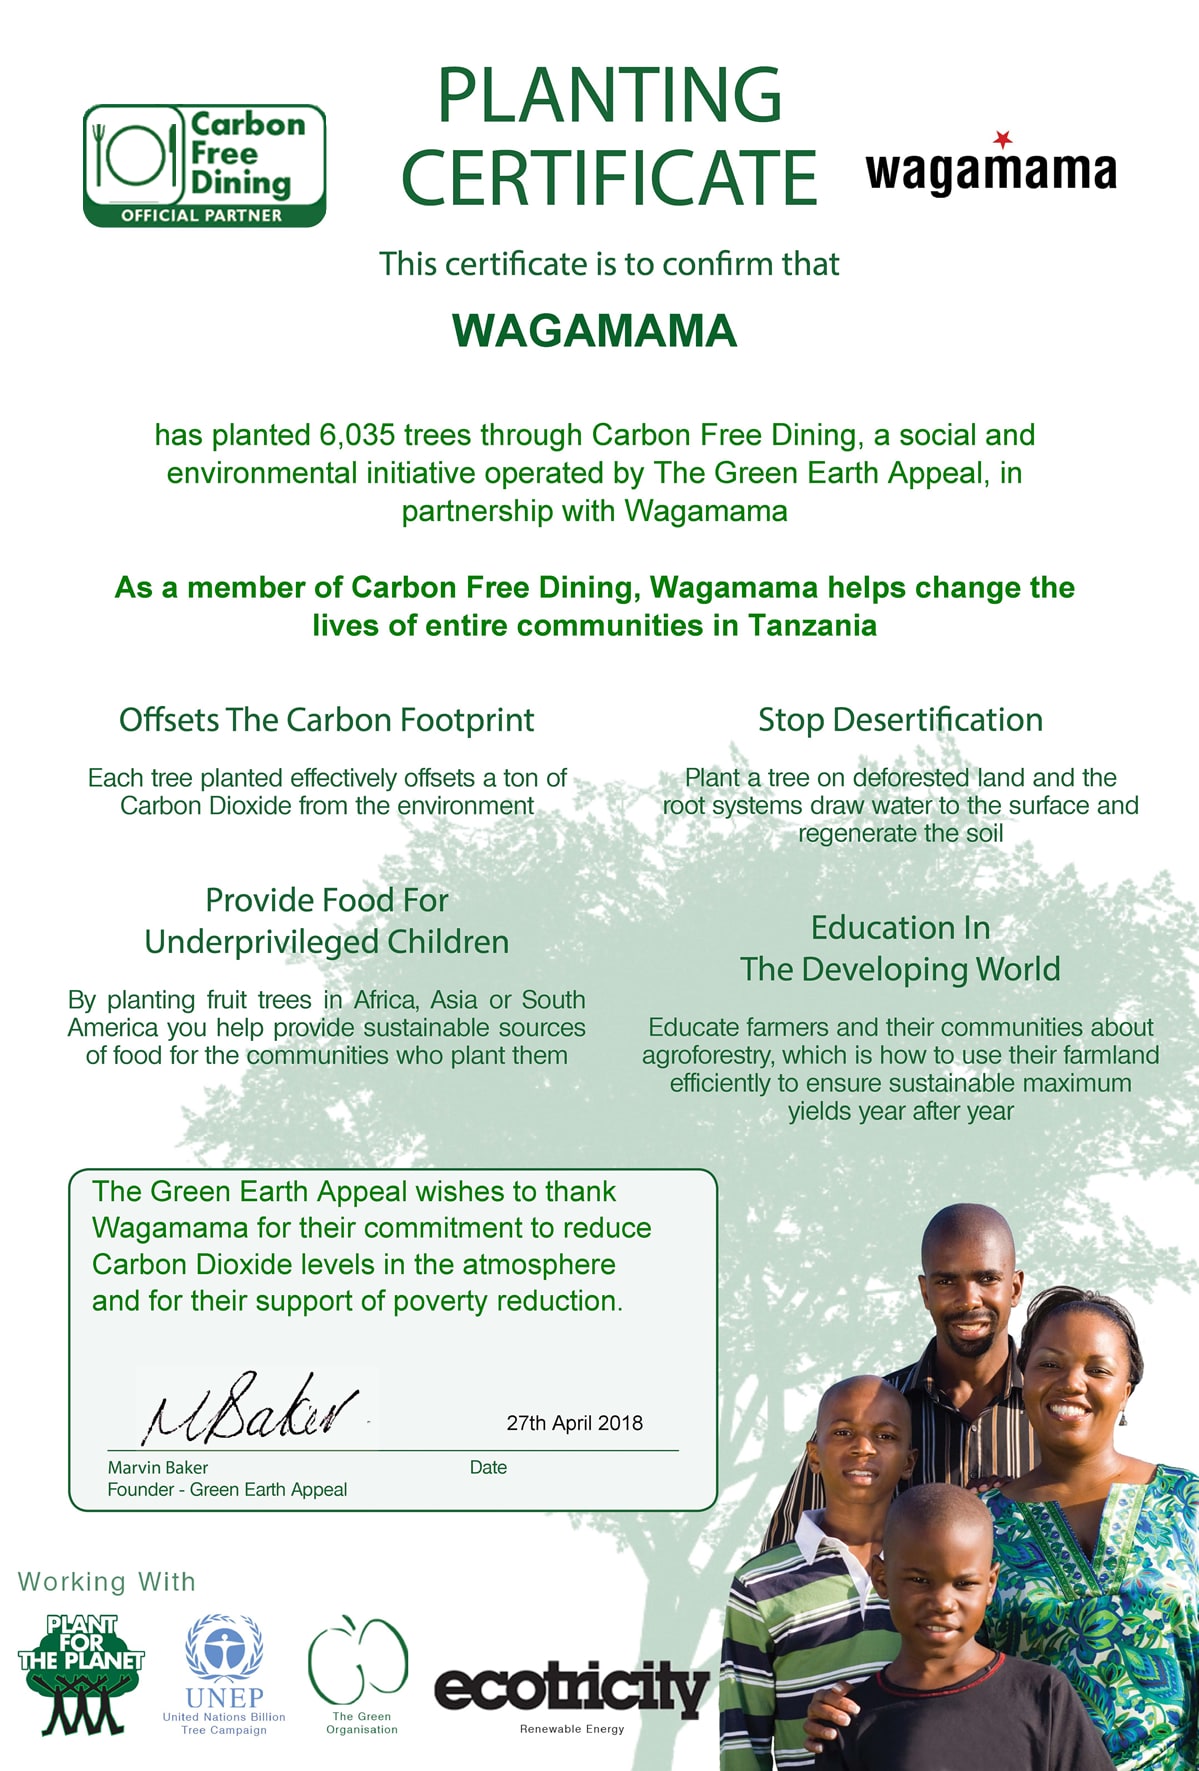 Carbon Free Dining - Wagamama Tree Planting Certificate